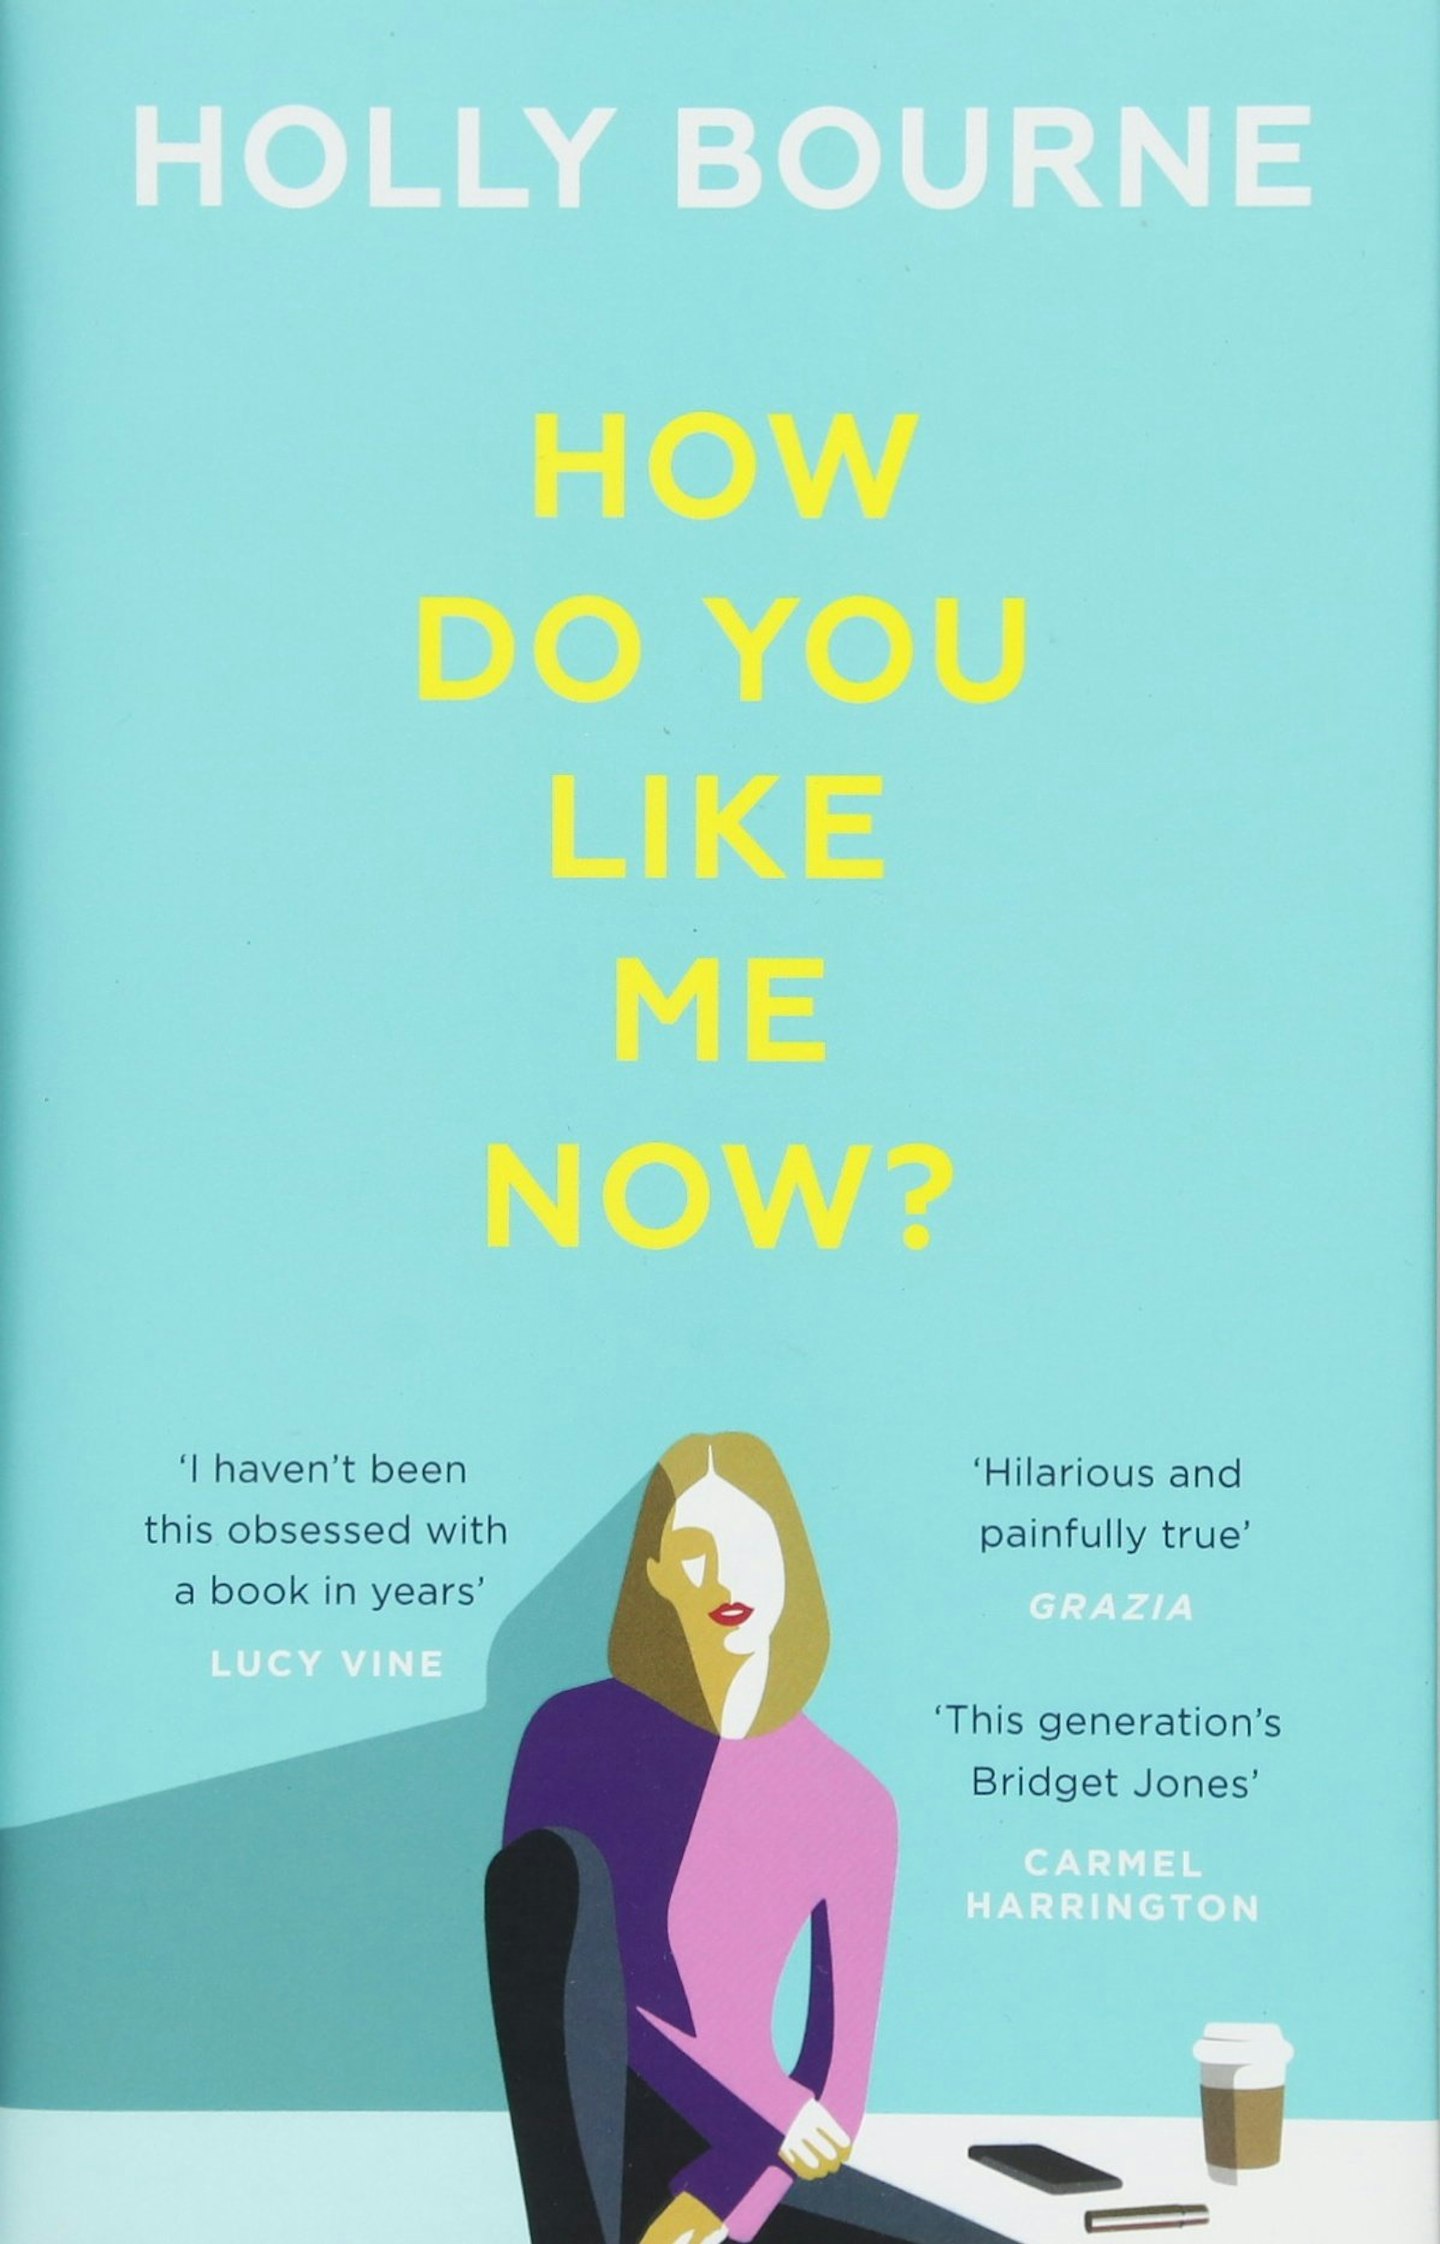 How do you like me now? by Holly Bourne